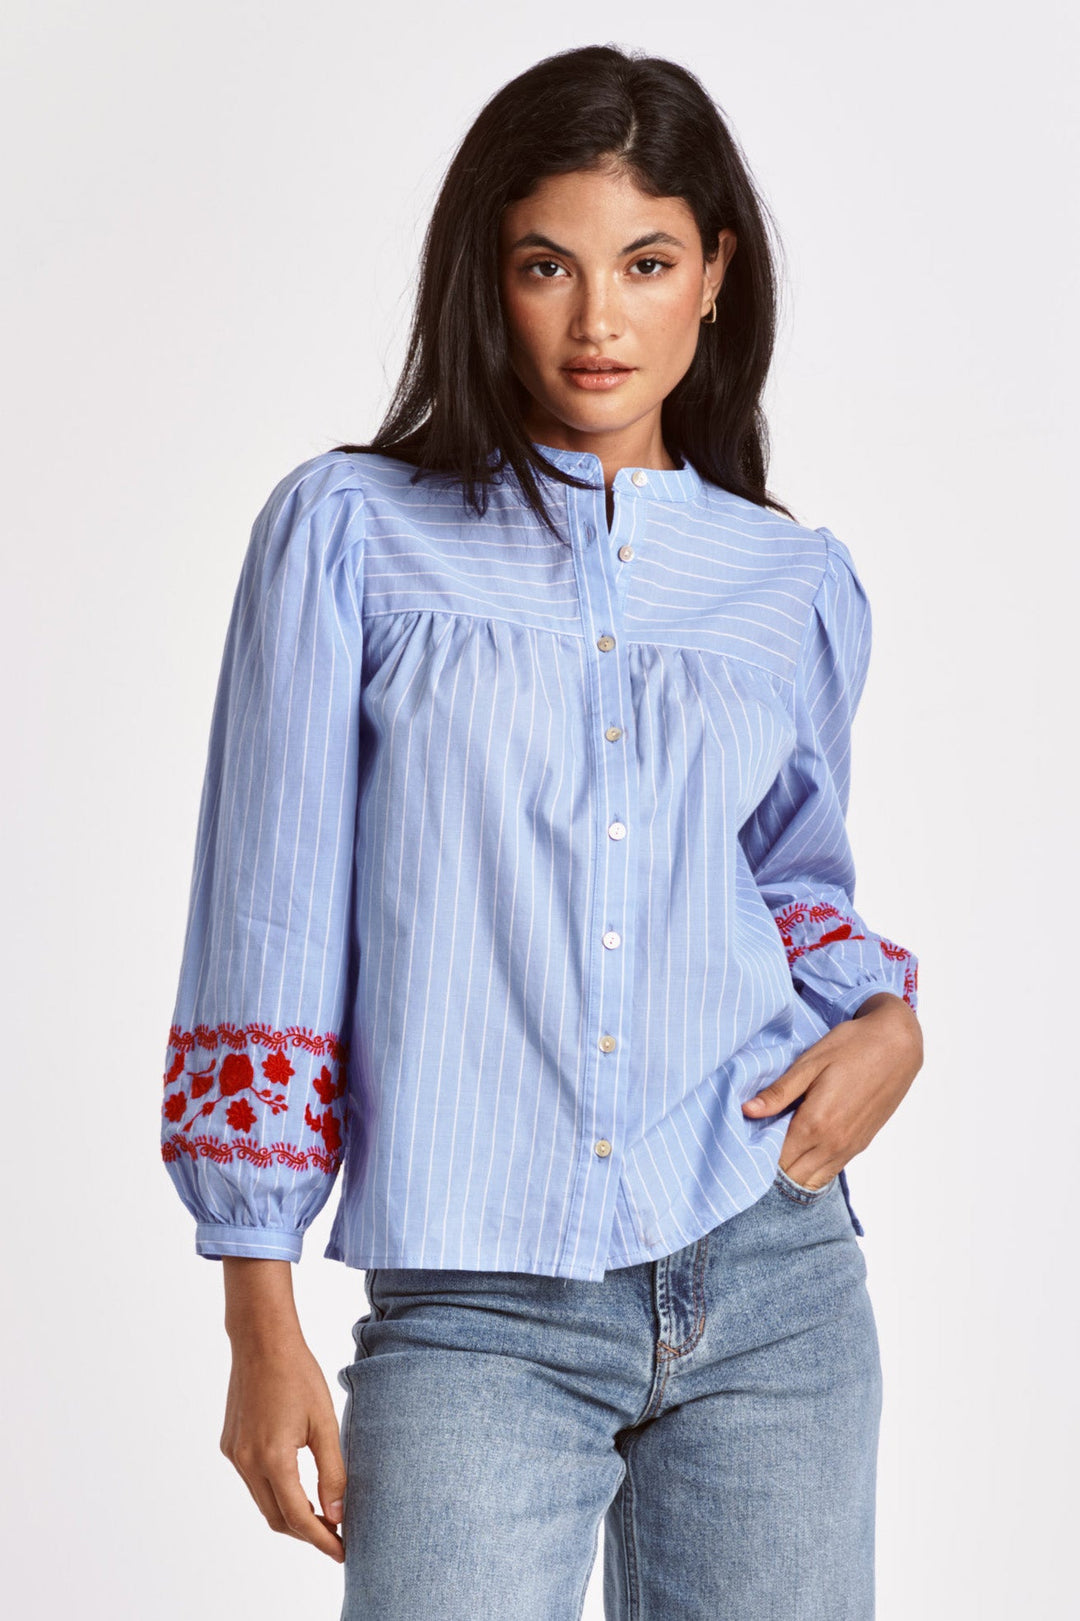 xanthe-embroidery-detail-shirt-red-pin